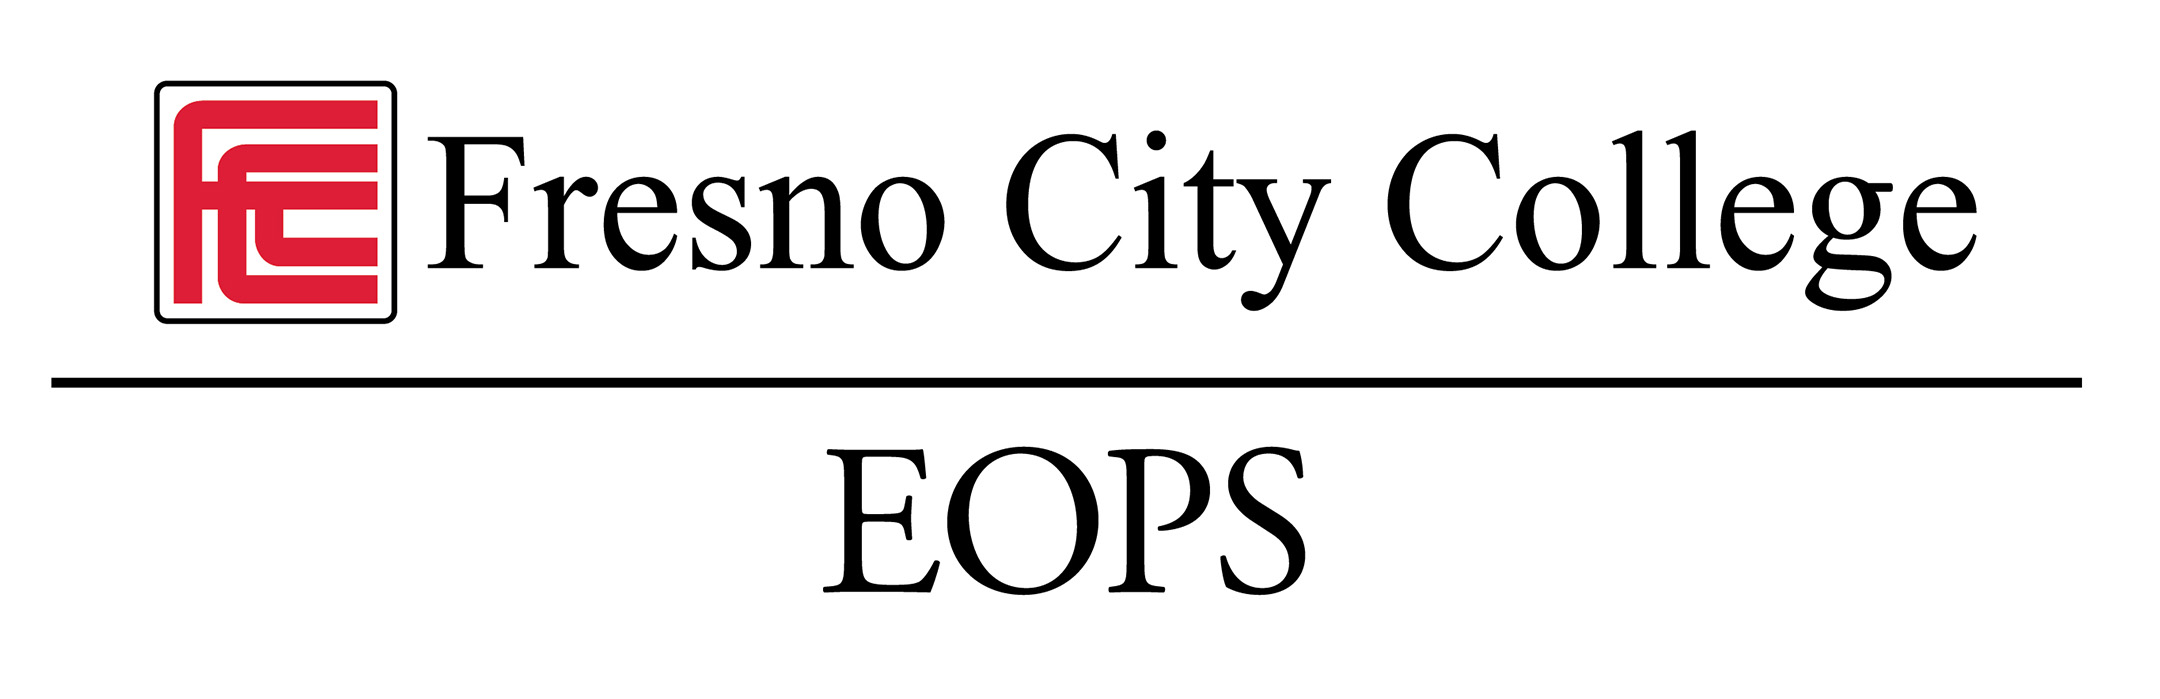 Fresno City College EOPS Department Graphic